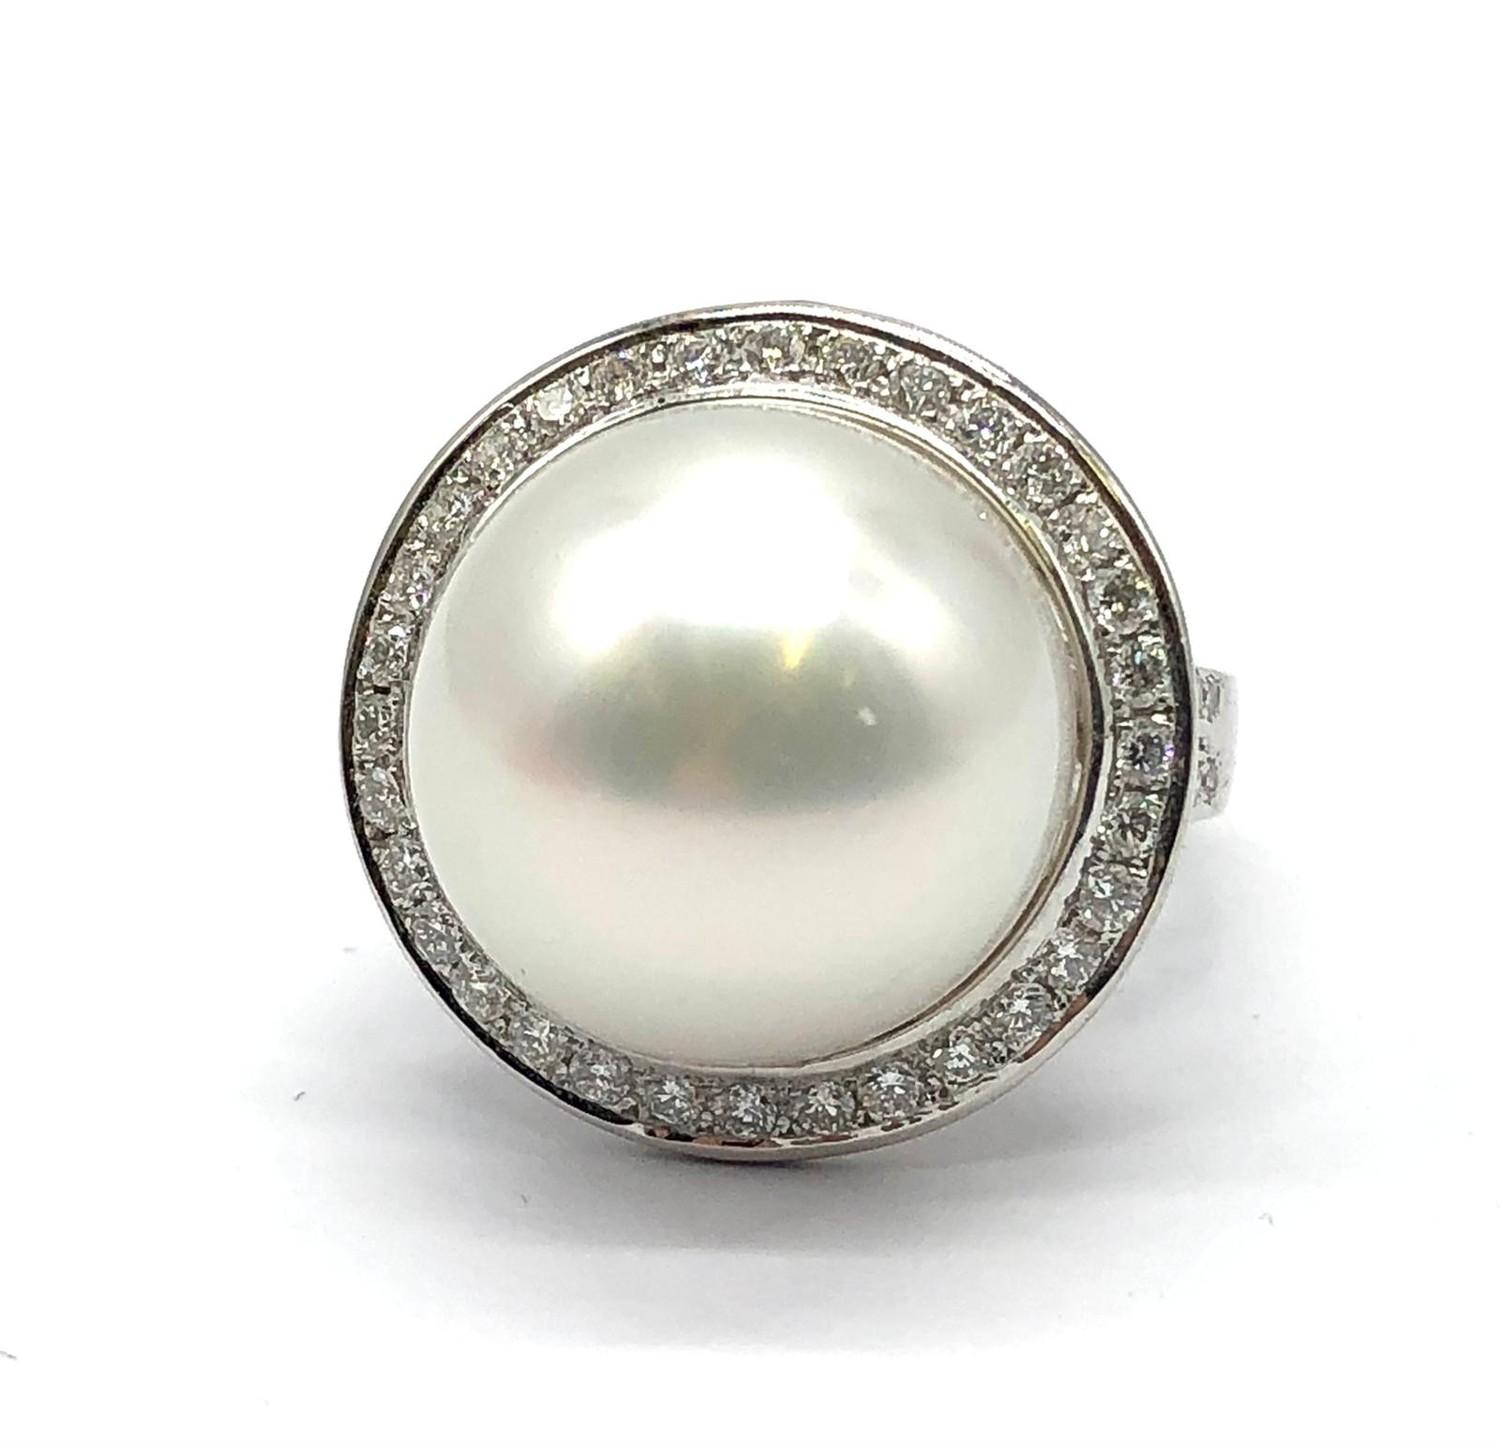 A large Kimoto pearl (17mm diameter) ring set in diamond and 18ct white gold ring, weight 14.43g and - Image 2 of 13